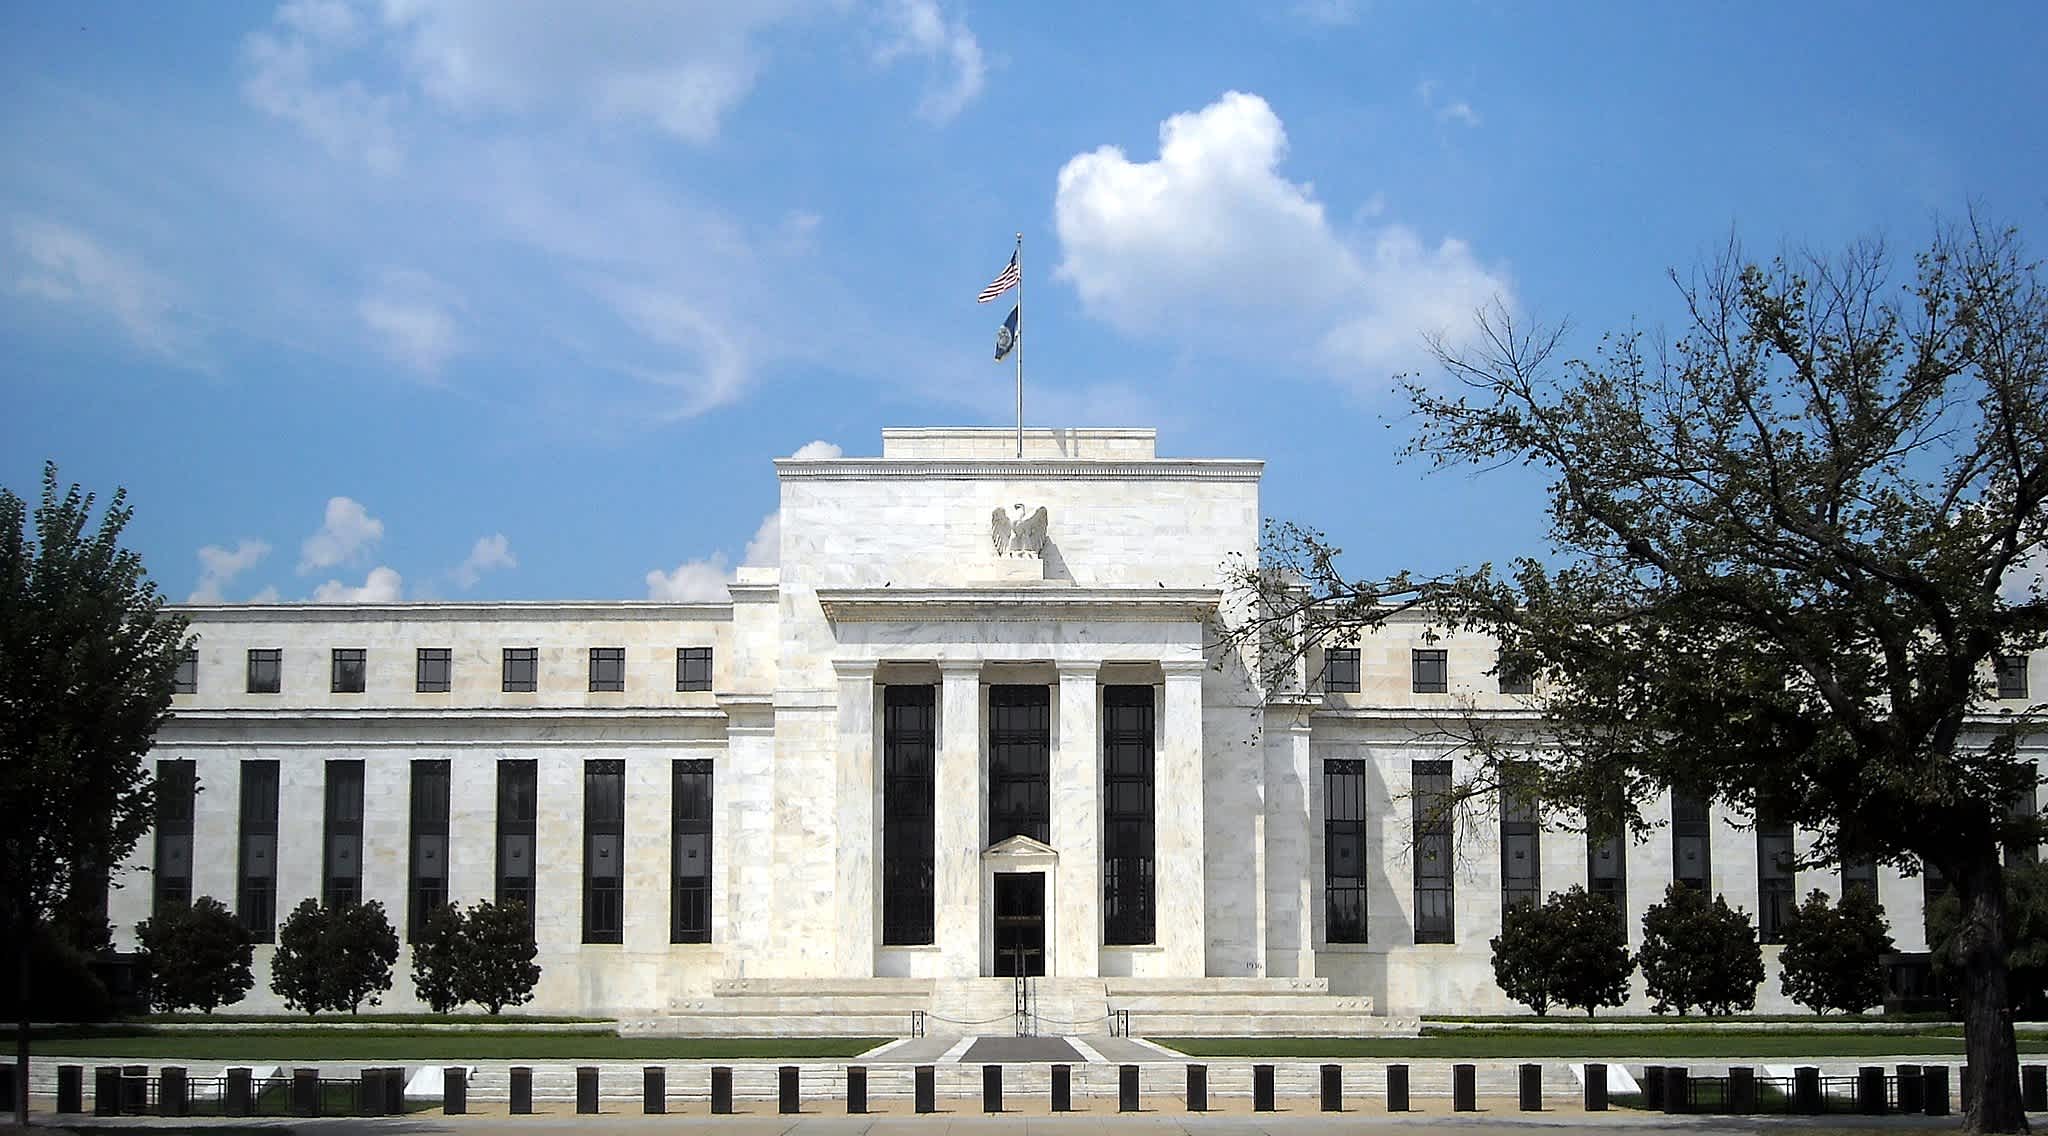 The Federal Reserve Aims to Fight Inflation by Increasing Interest Rates